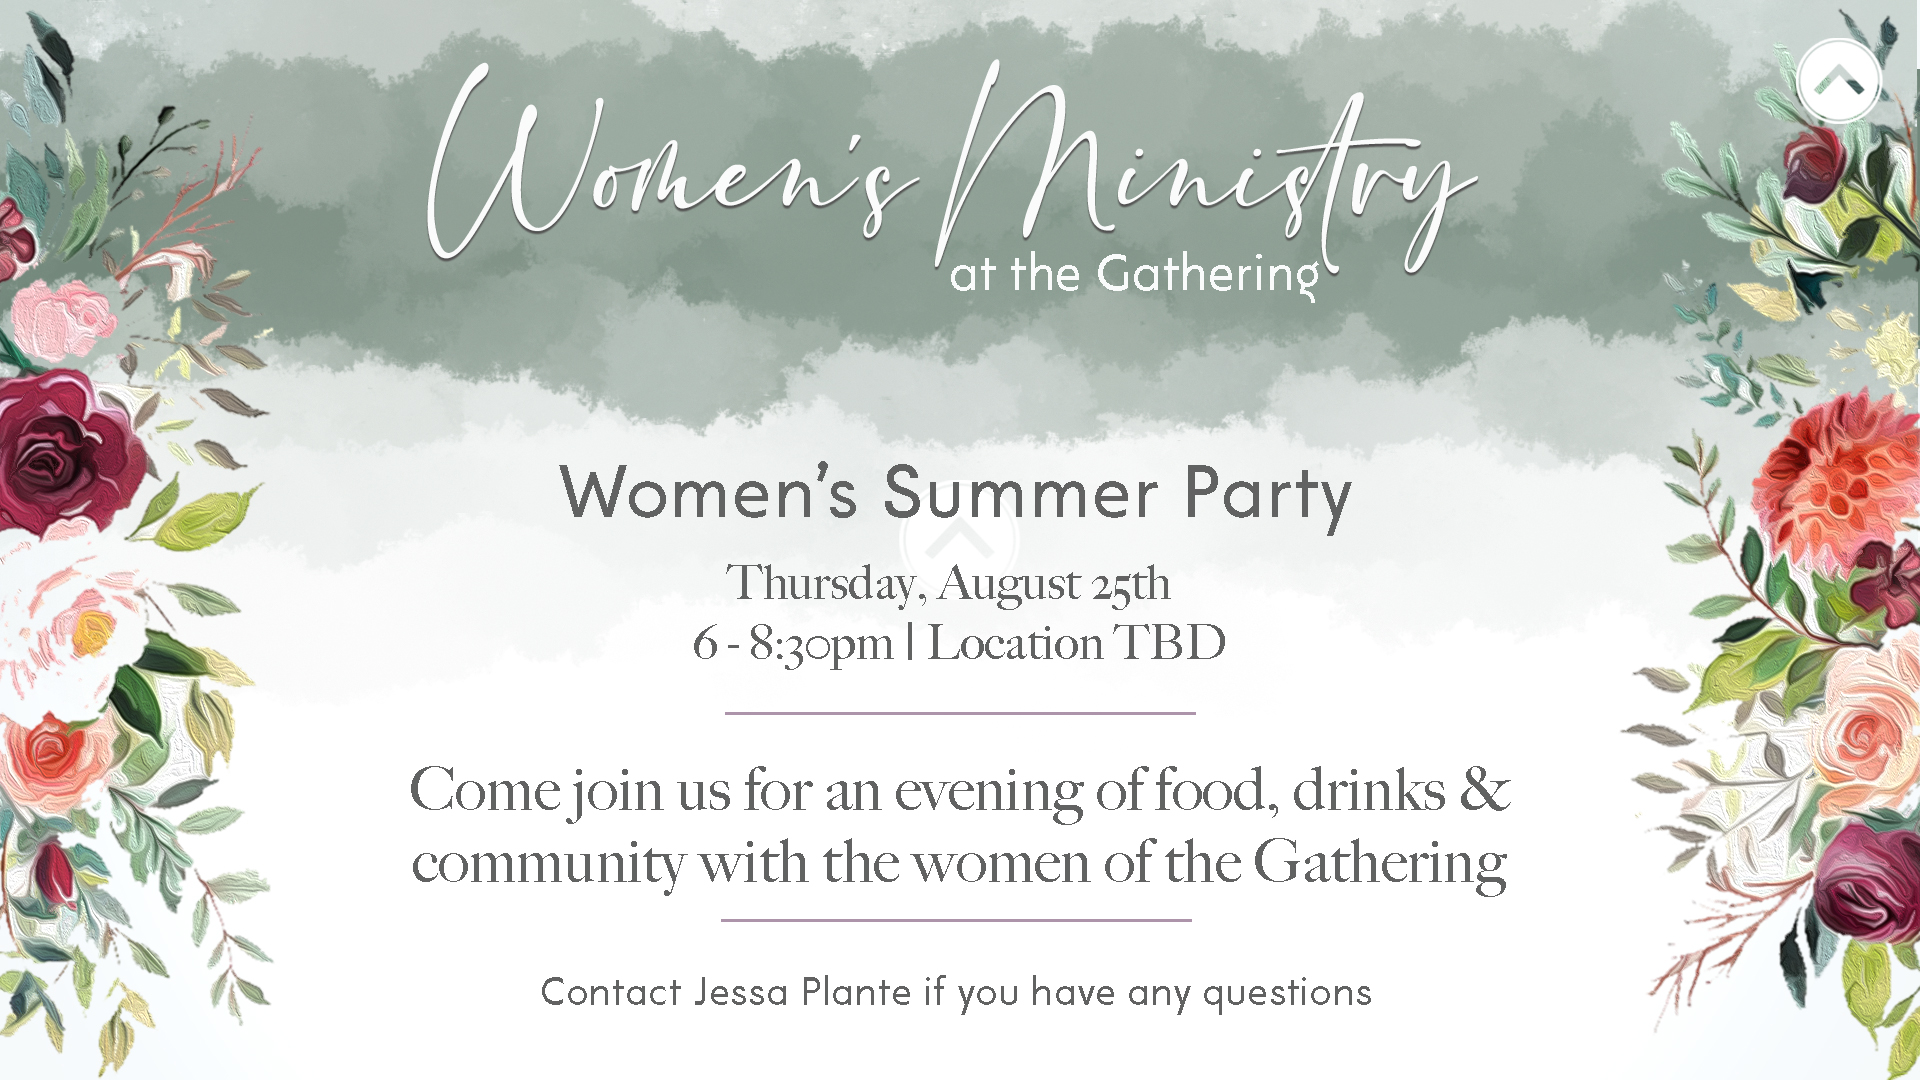 Women's Summer Party image